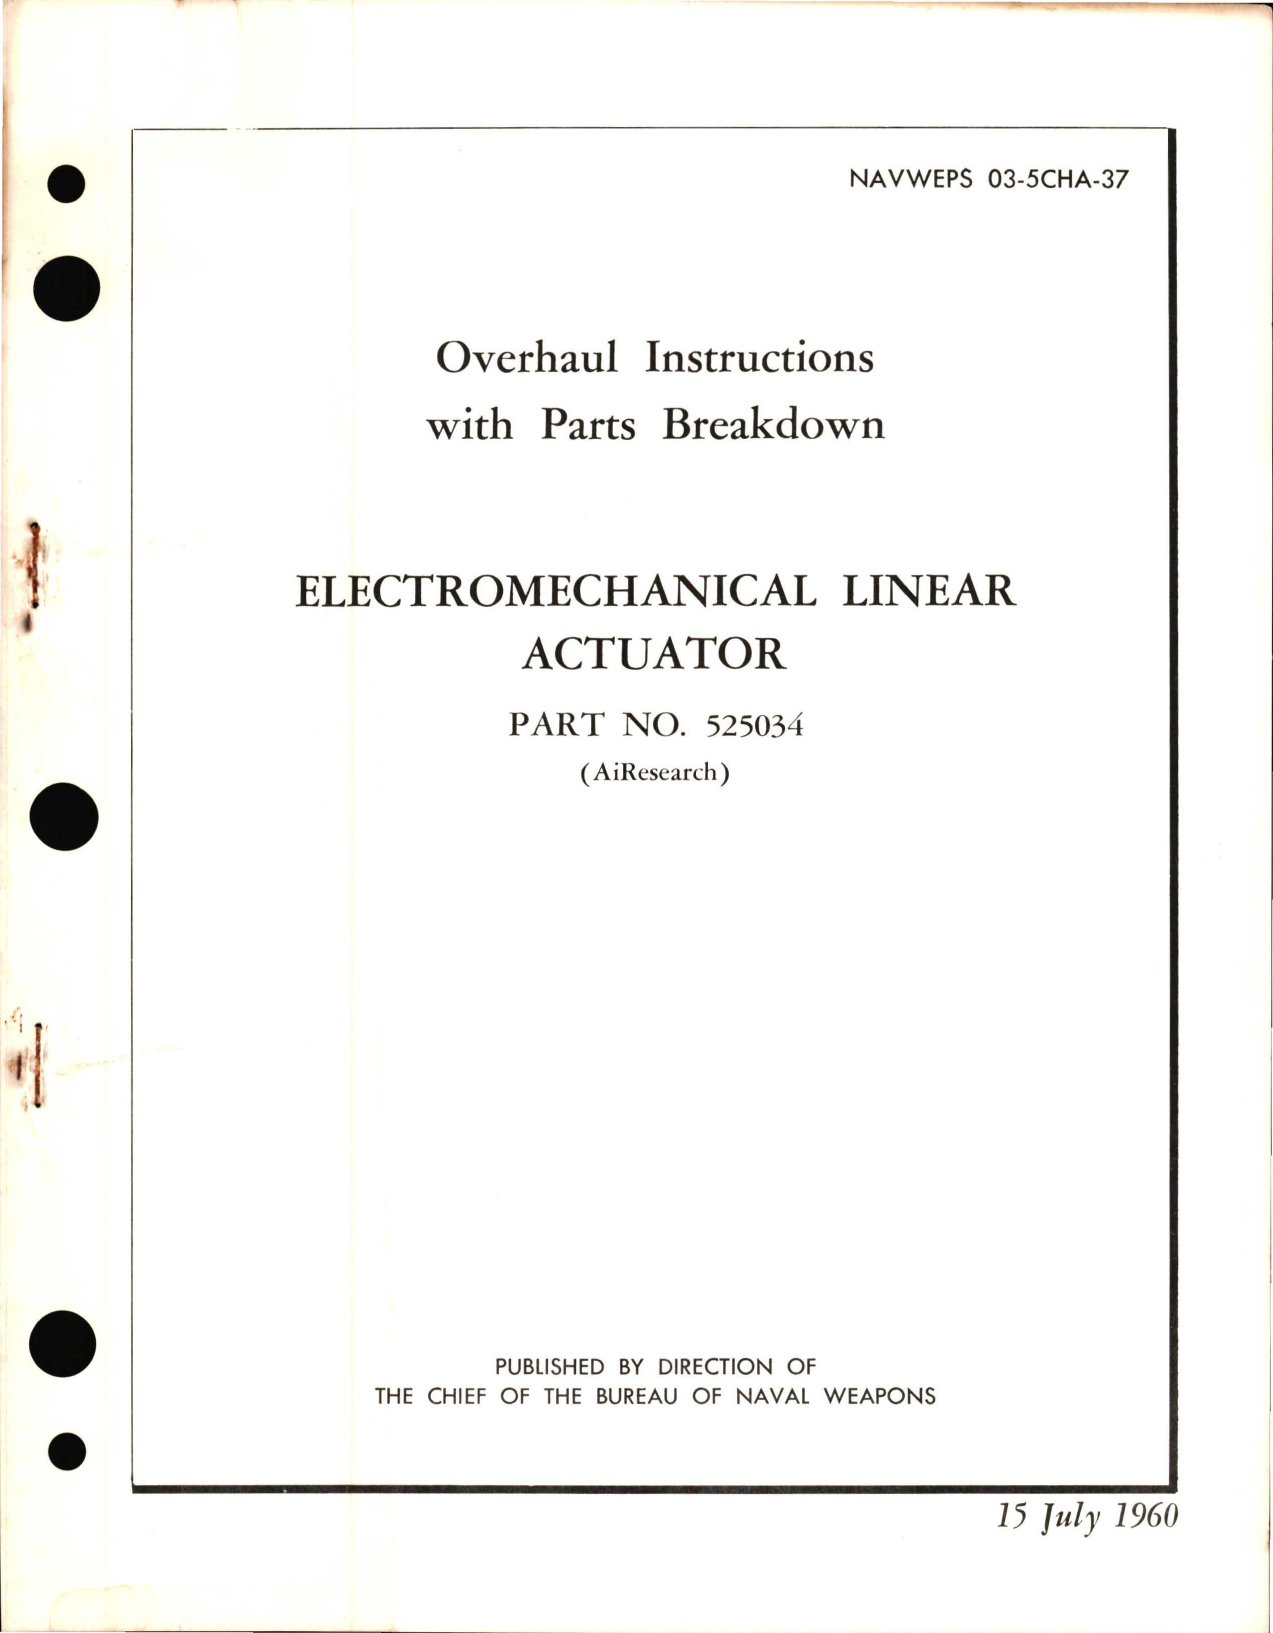 Sample page 1 from AirCorps Library document: Overhaul Instructions with Parts Breakdown for Electromechanical Linear Actuator - Part 525034